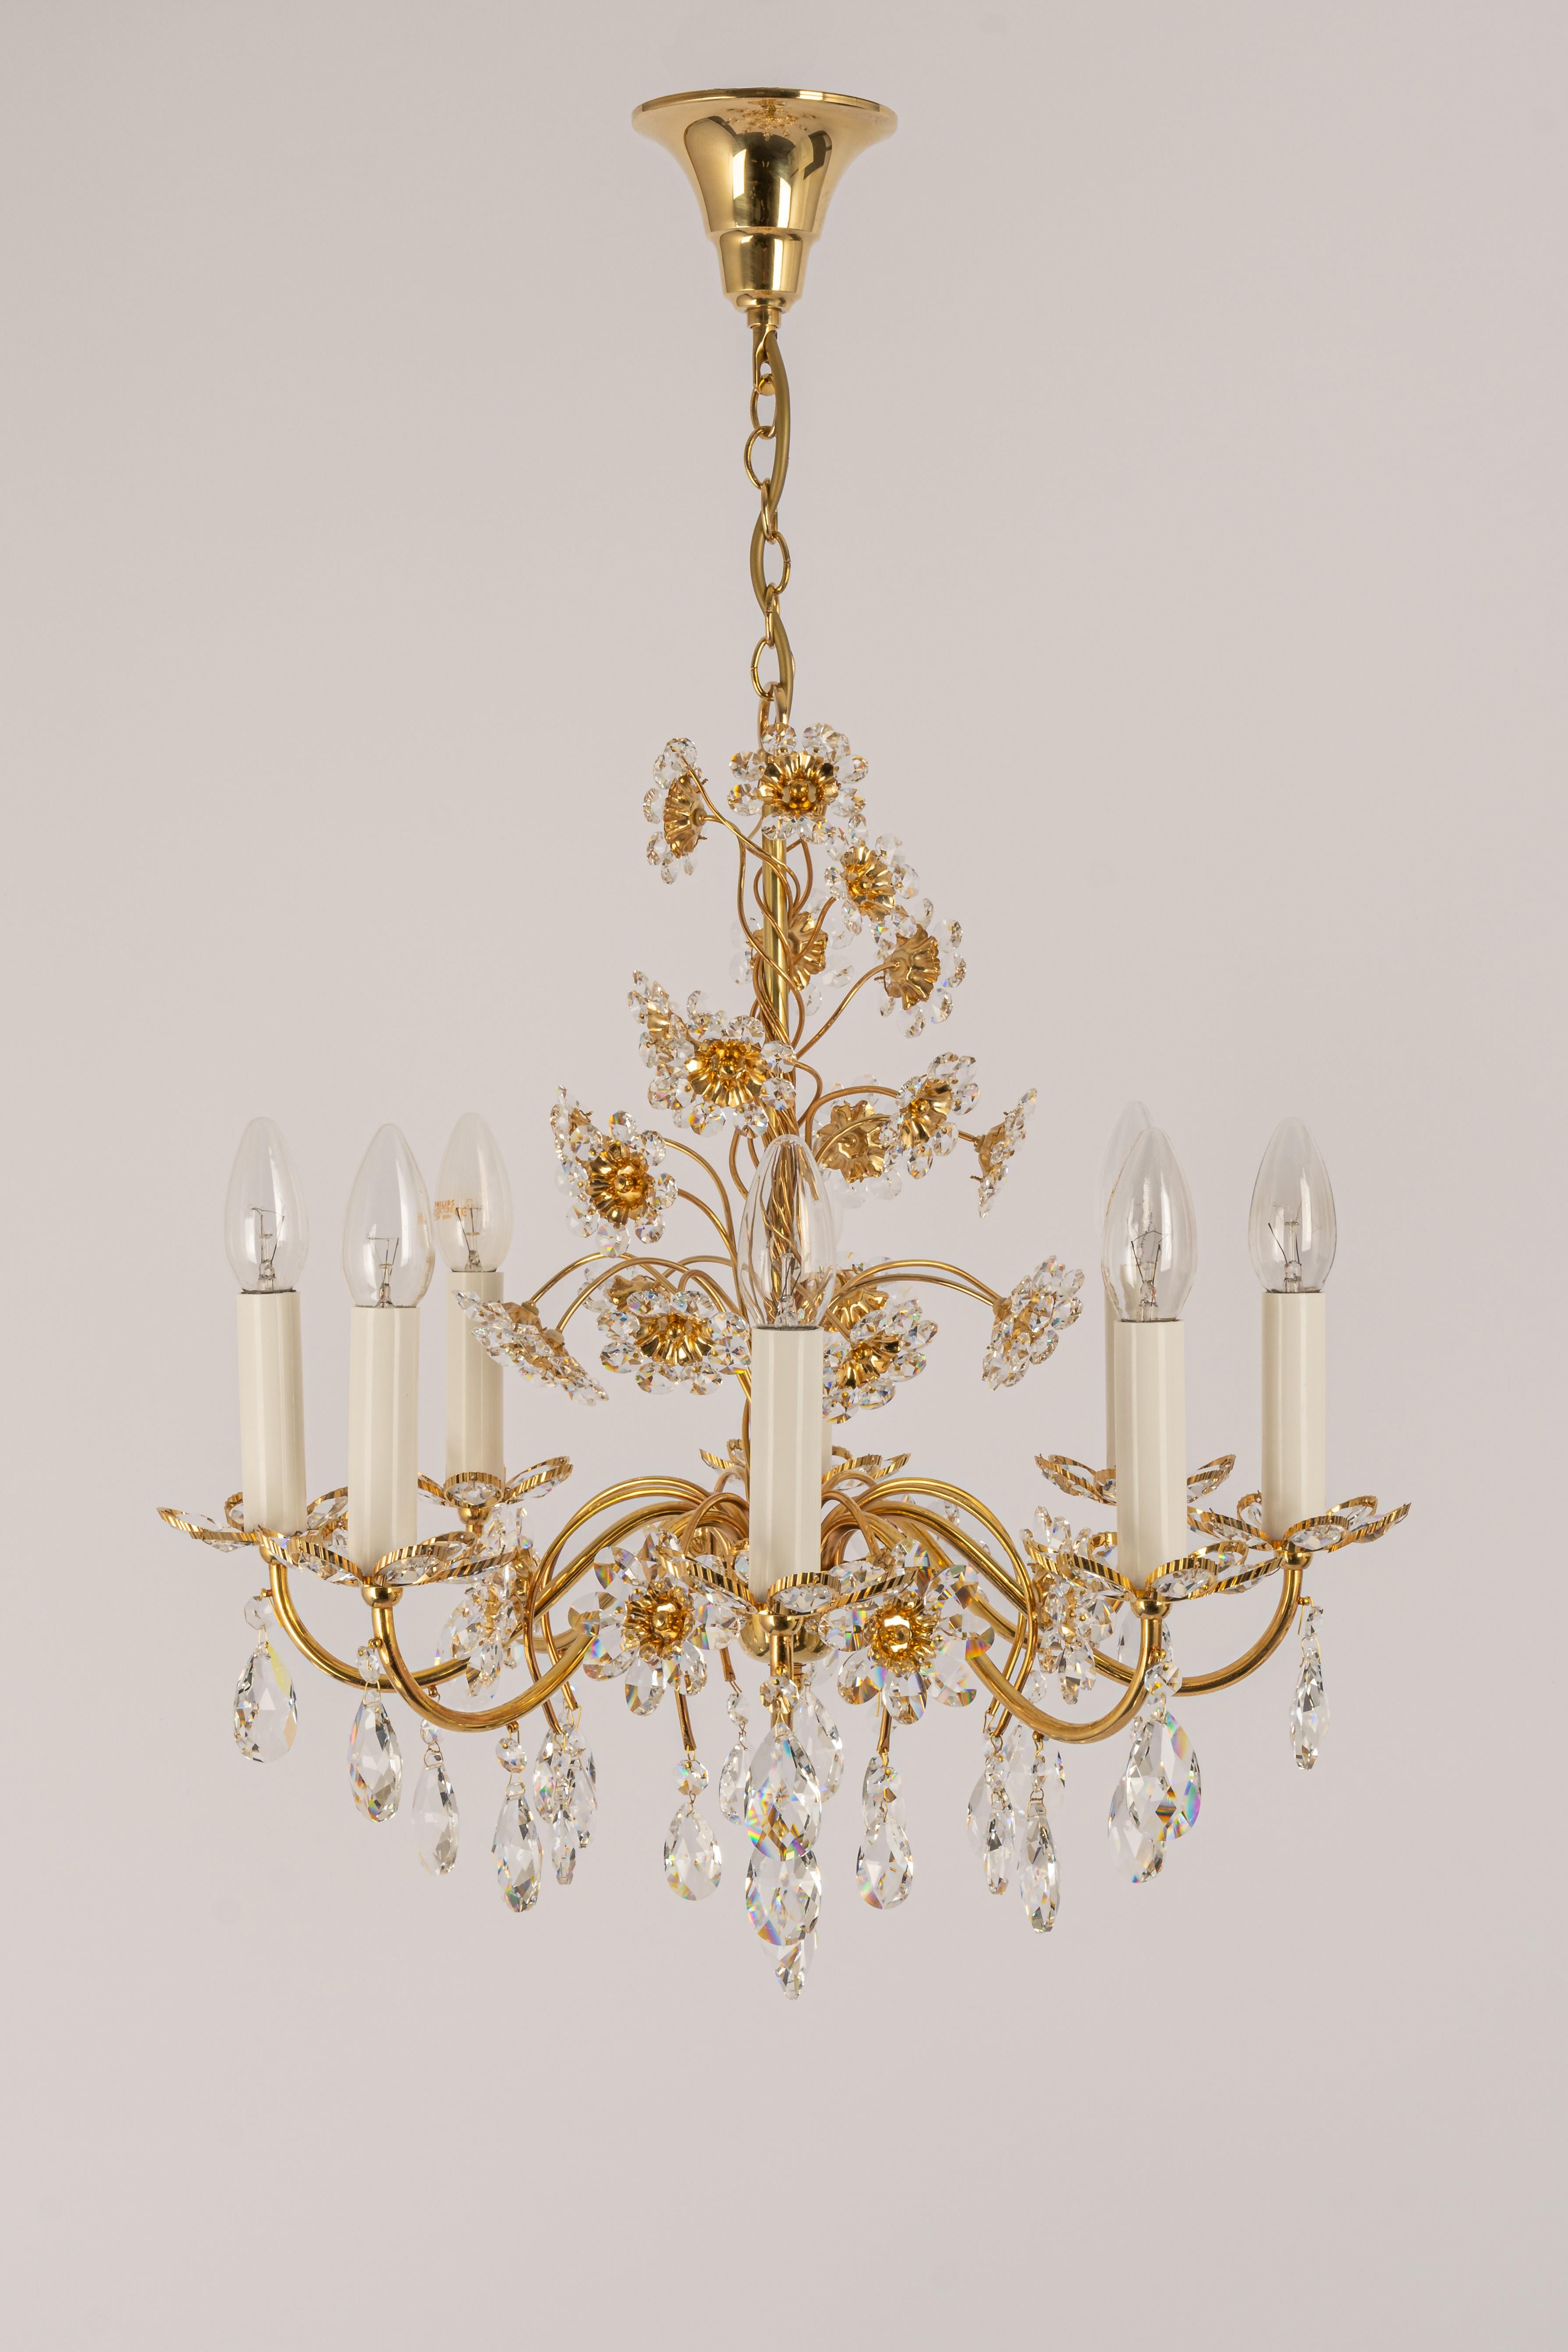 Large midcentury gilt brass chandelier with crystal glasses, made by Palwa, Germany, manufactured, circa 1970-1979.
High quality and in very good condition. Cleaned, well-wired and ready to use. 

The chandelier requires 8x E14 Standard bulbs